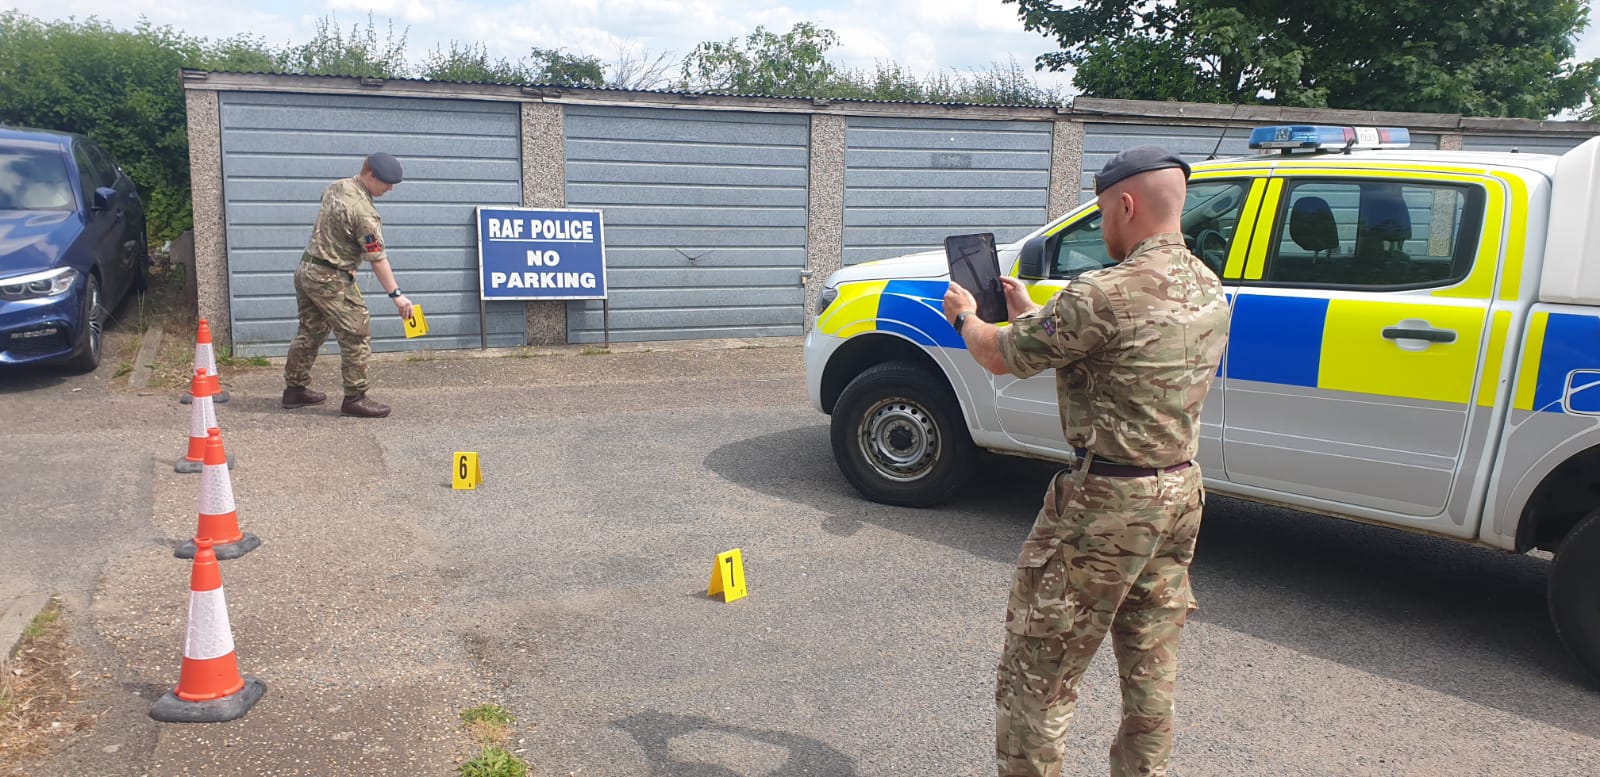 Image shows RAF Police taking pictures and setting out cones to mark a scenario crime scene in a garage car park, with their emergency vehicles.